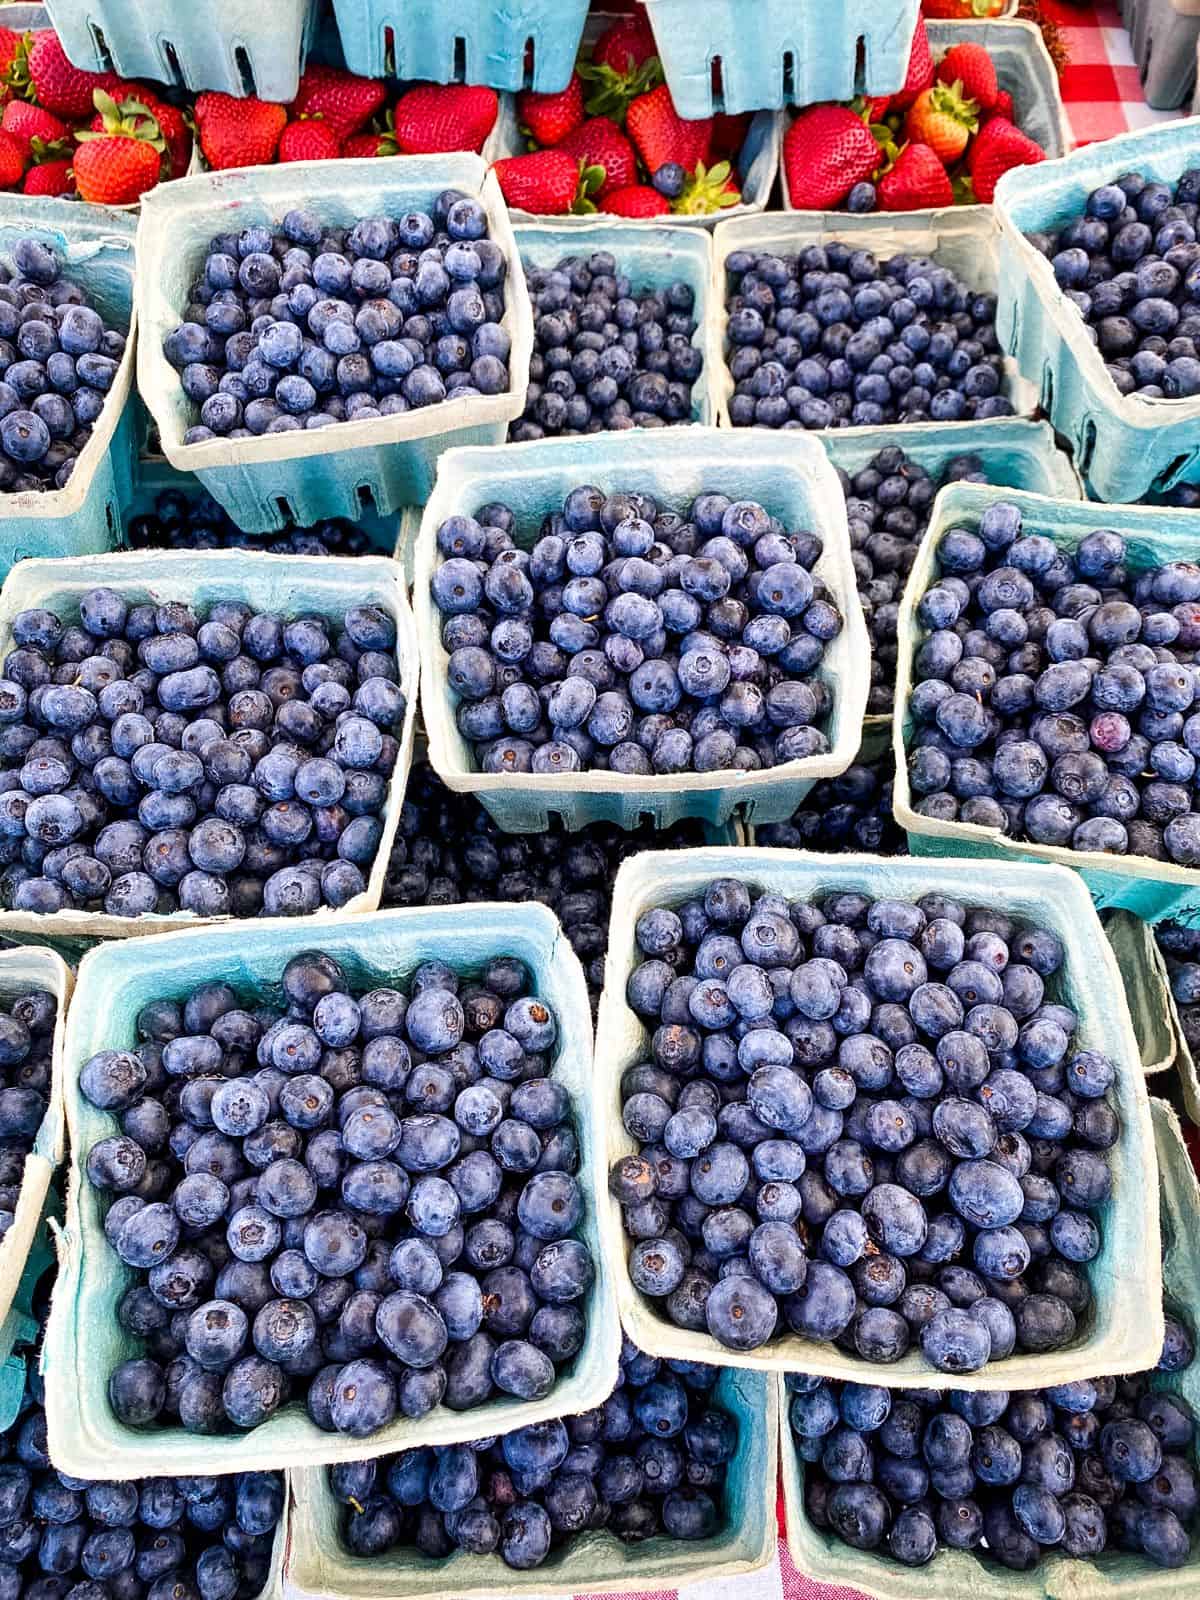 Blueberries at farmers market.